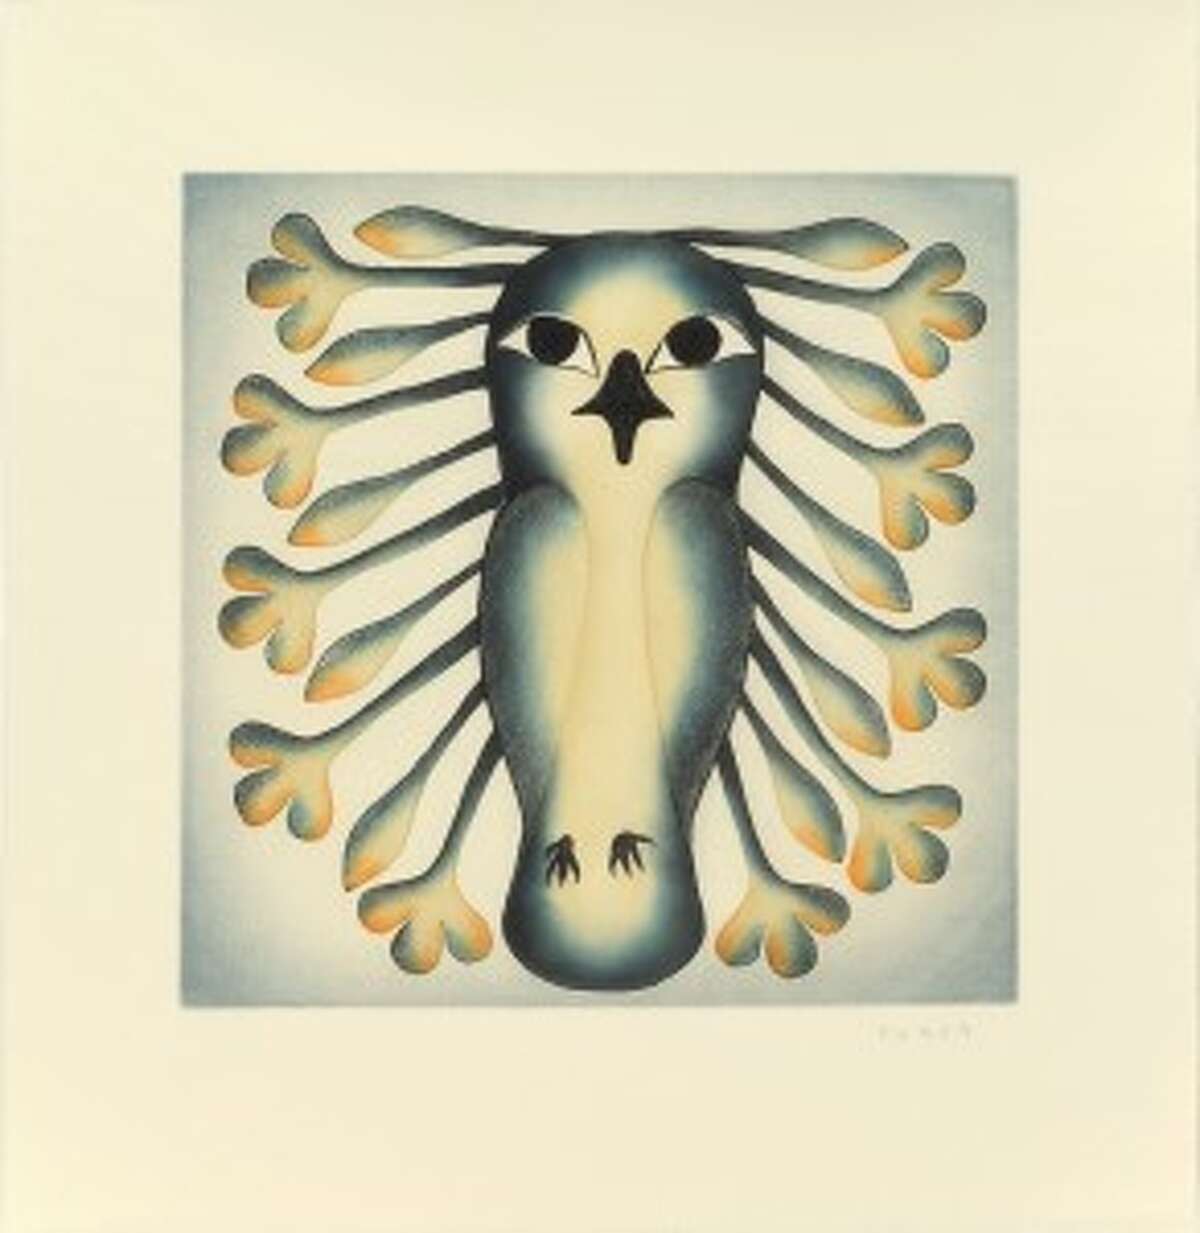 INUIT PRINT: Lustrous Owl, by Kenojuak Ashevak is an example of Inuit work featured in the Dennos Museum Center’s annual Cape Dorset Graphics Collection, which featured lottery sales of prints and conferences with the artists last weekend. The Cape Dorset exhibit will continue through Dec 17. (Courtesy photo)